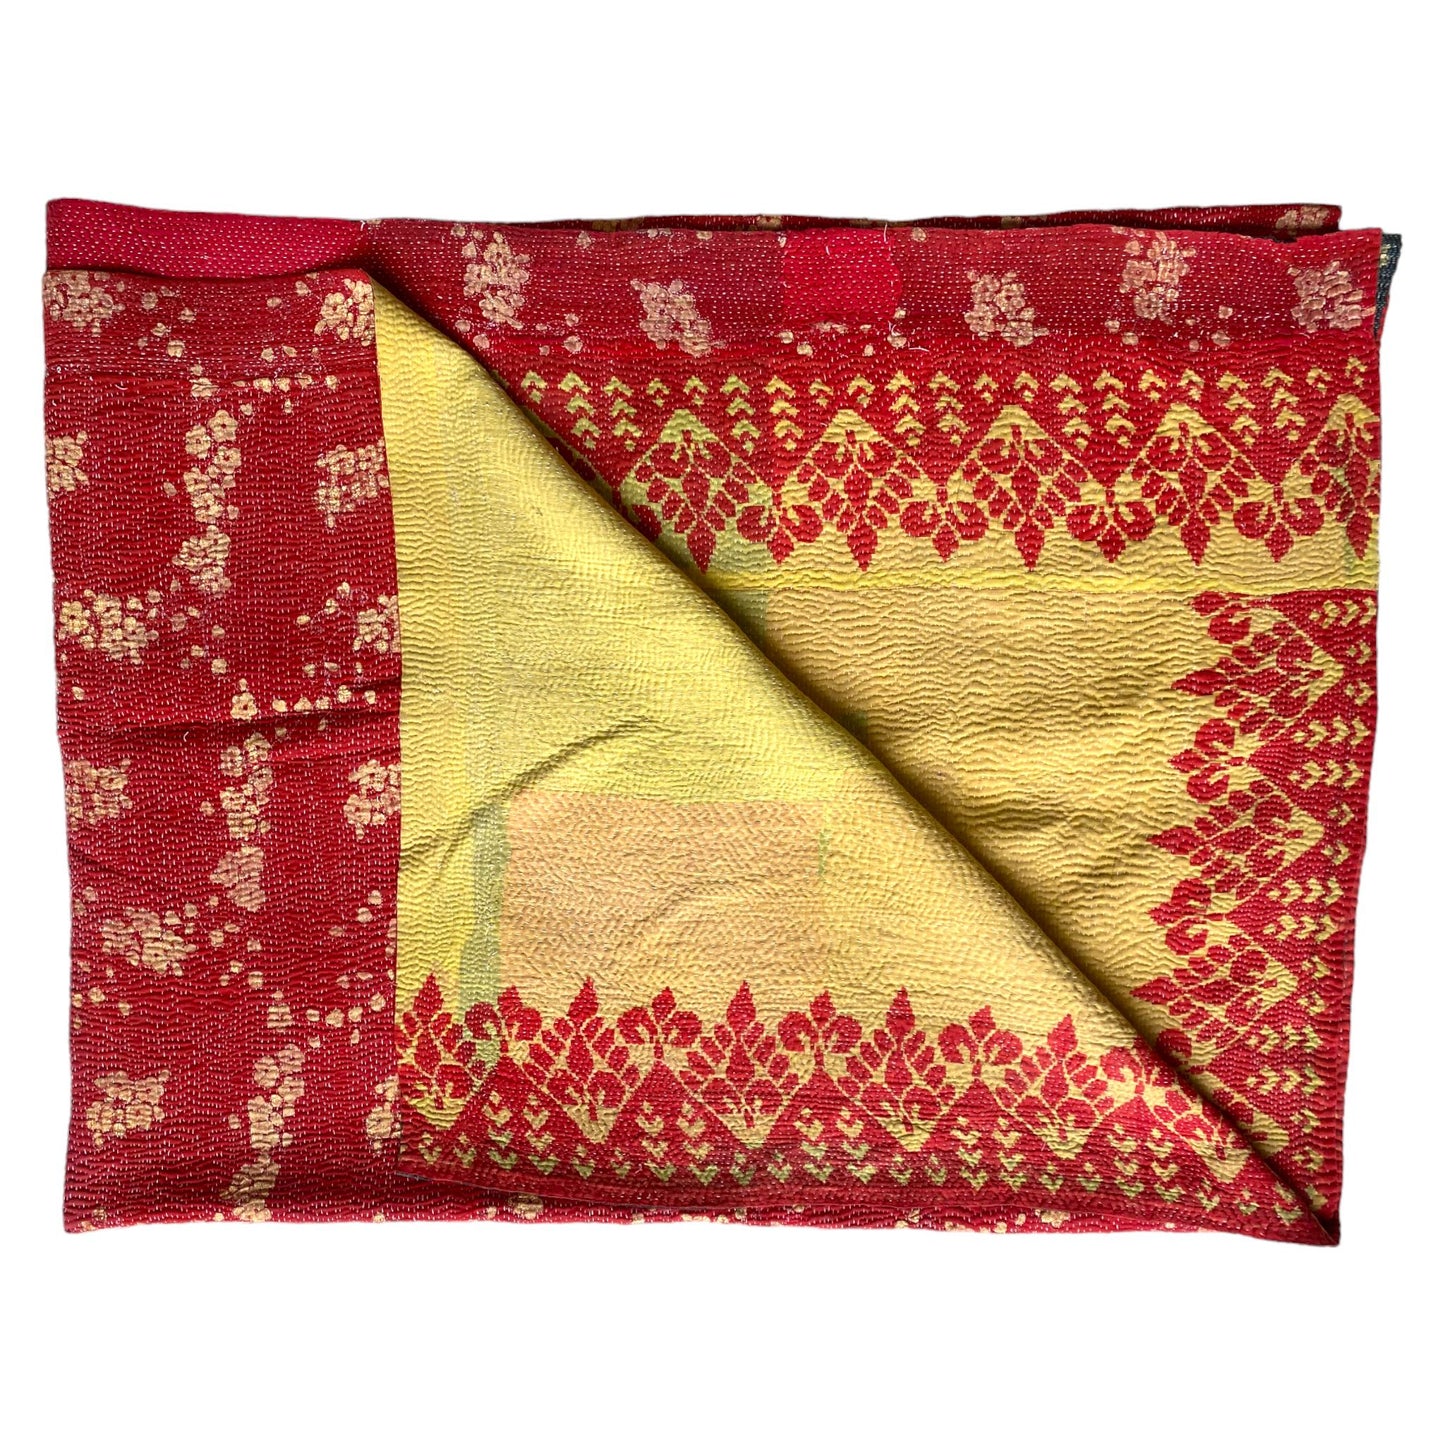 Red and yellow kantha quilt vintage